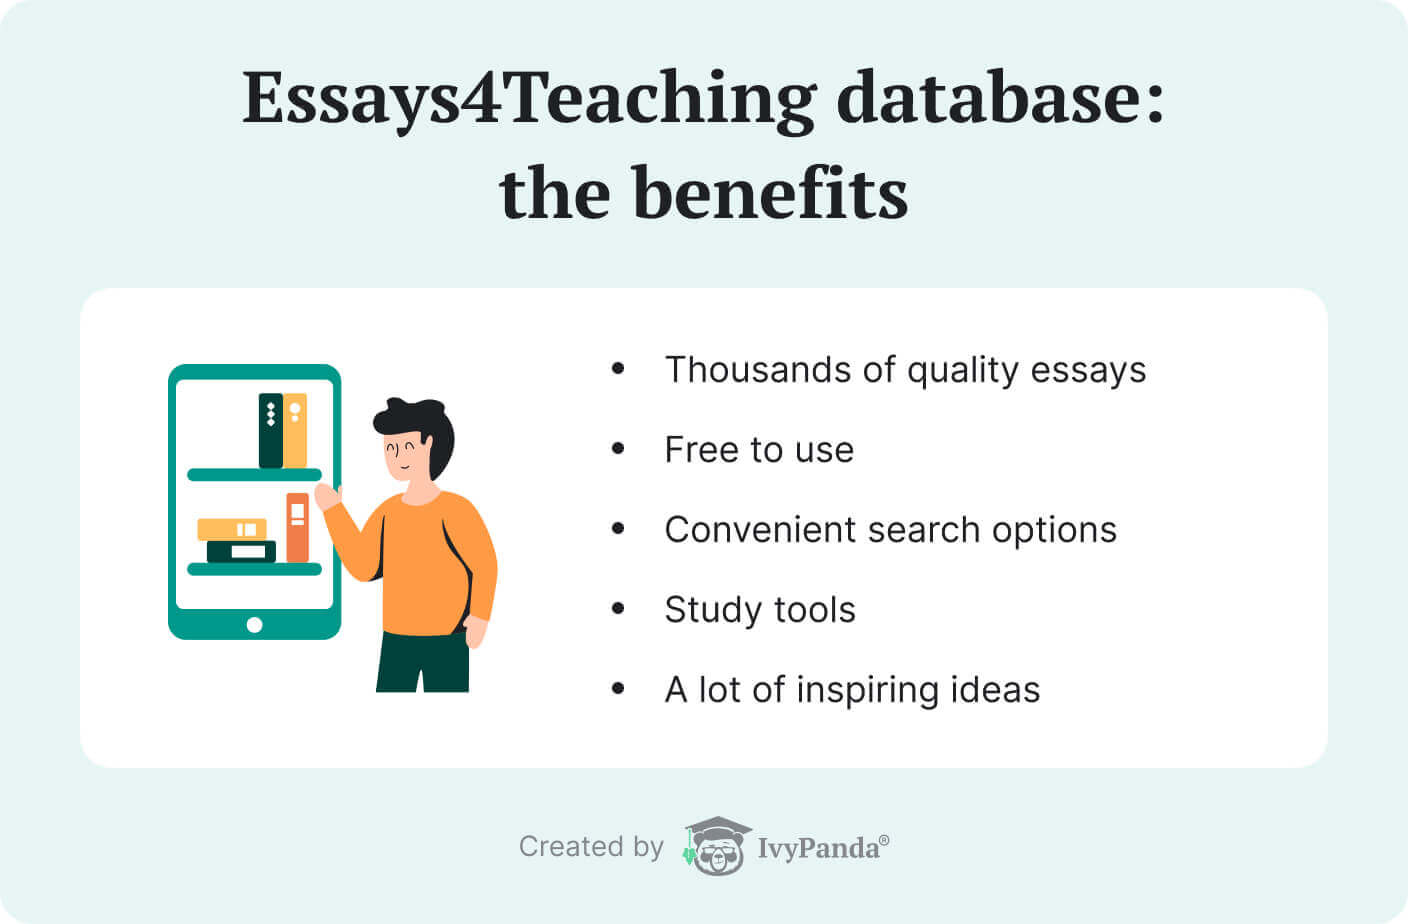 The picture lists the benefits of Essays4Teaching essay database.